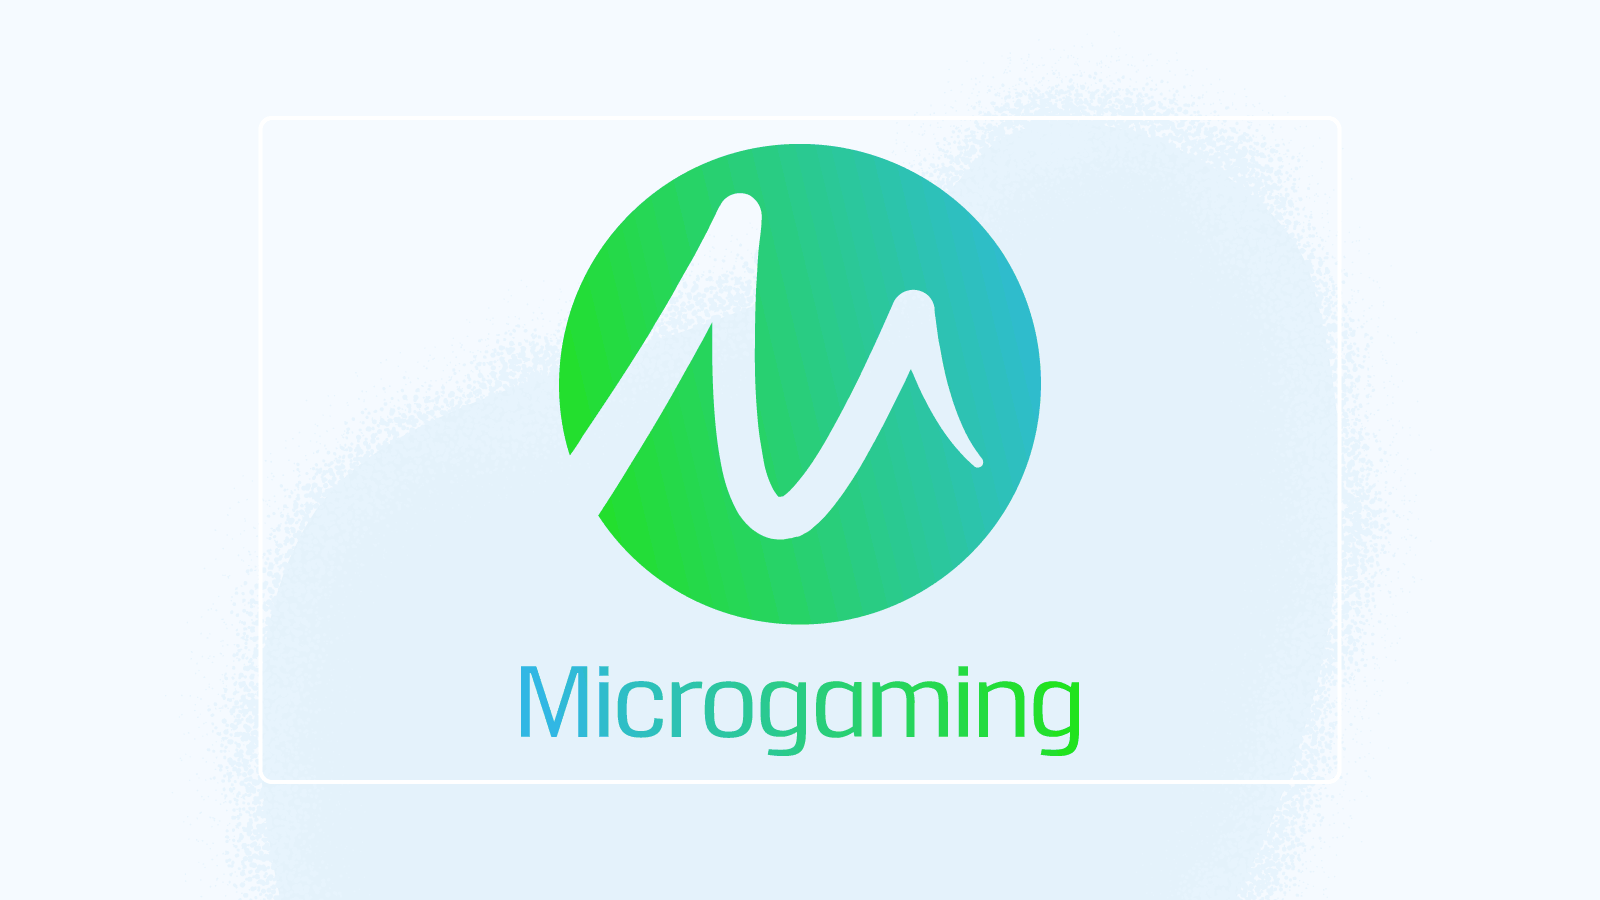 Microgaming is the creator of popular jackpots